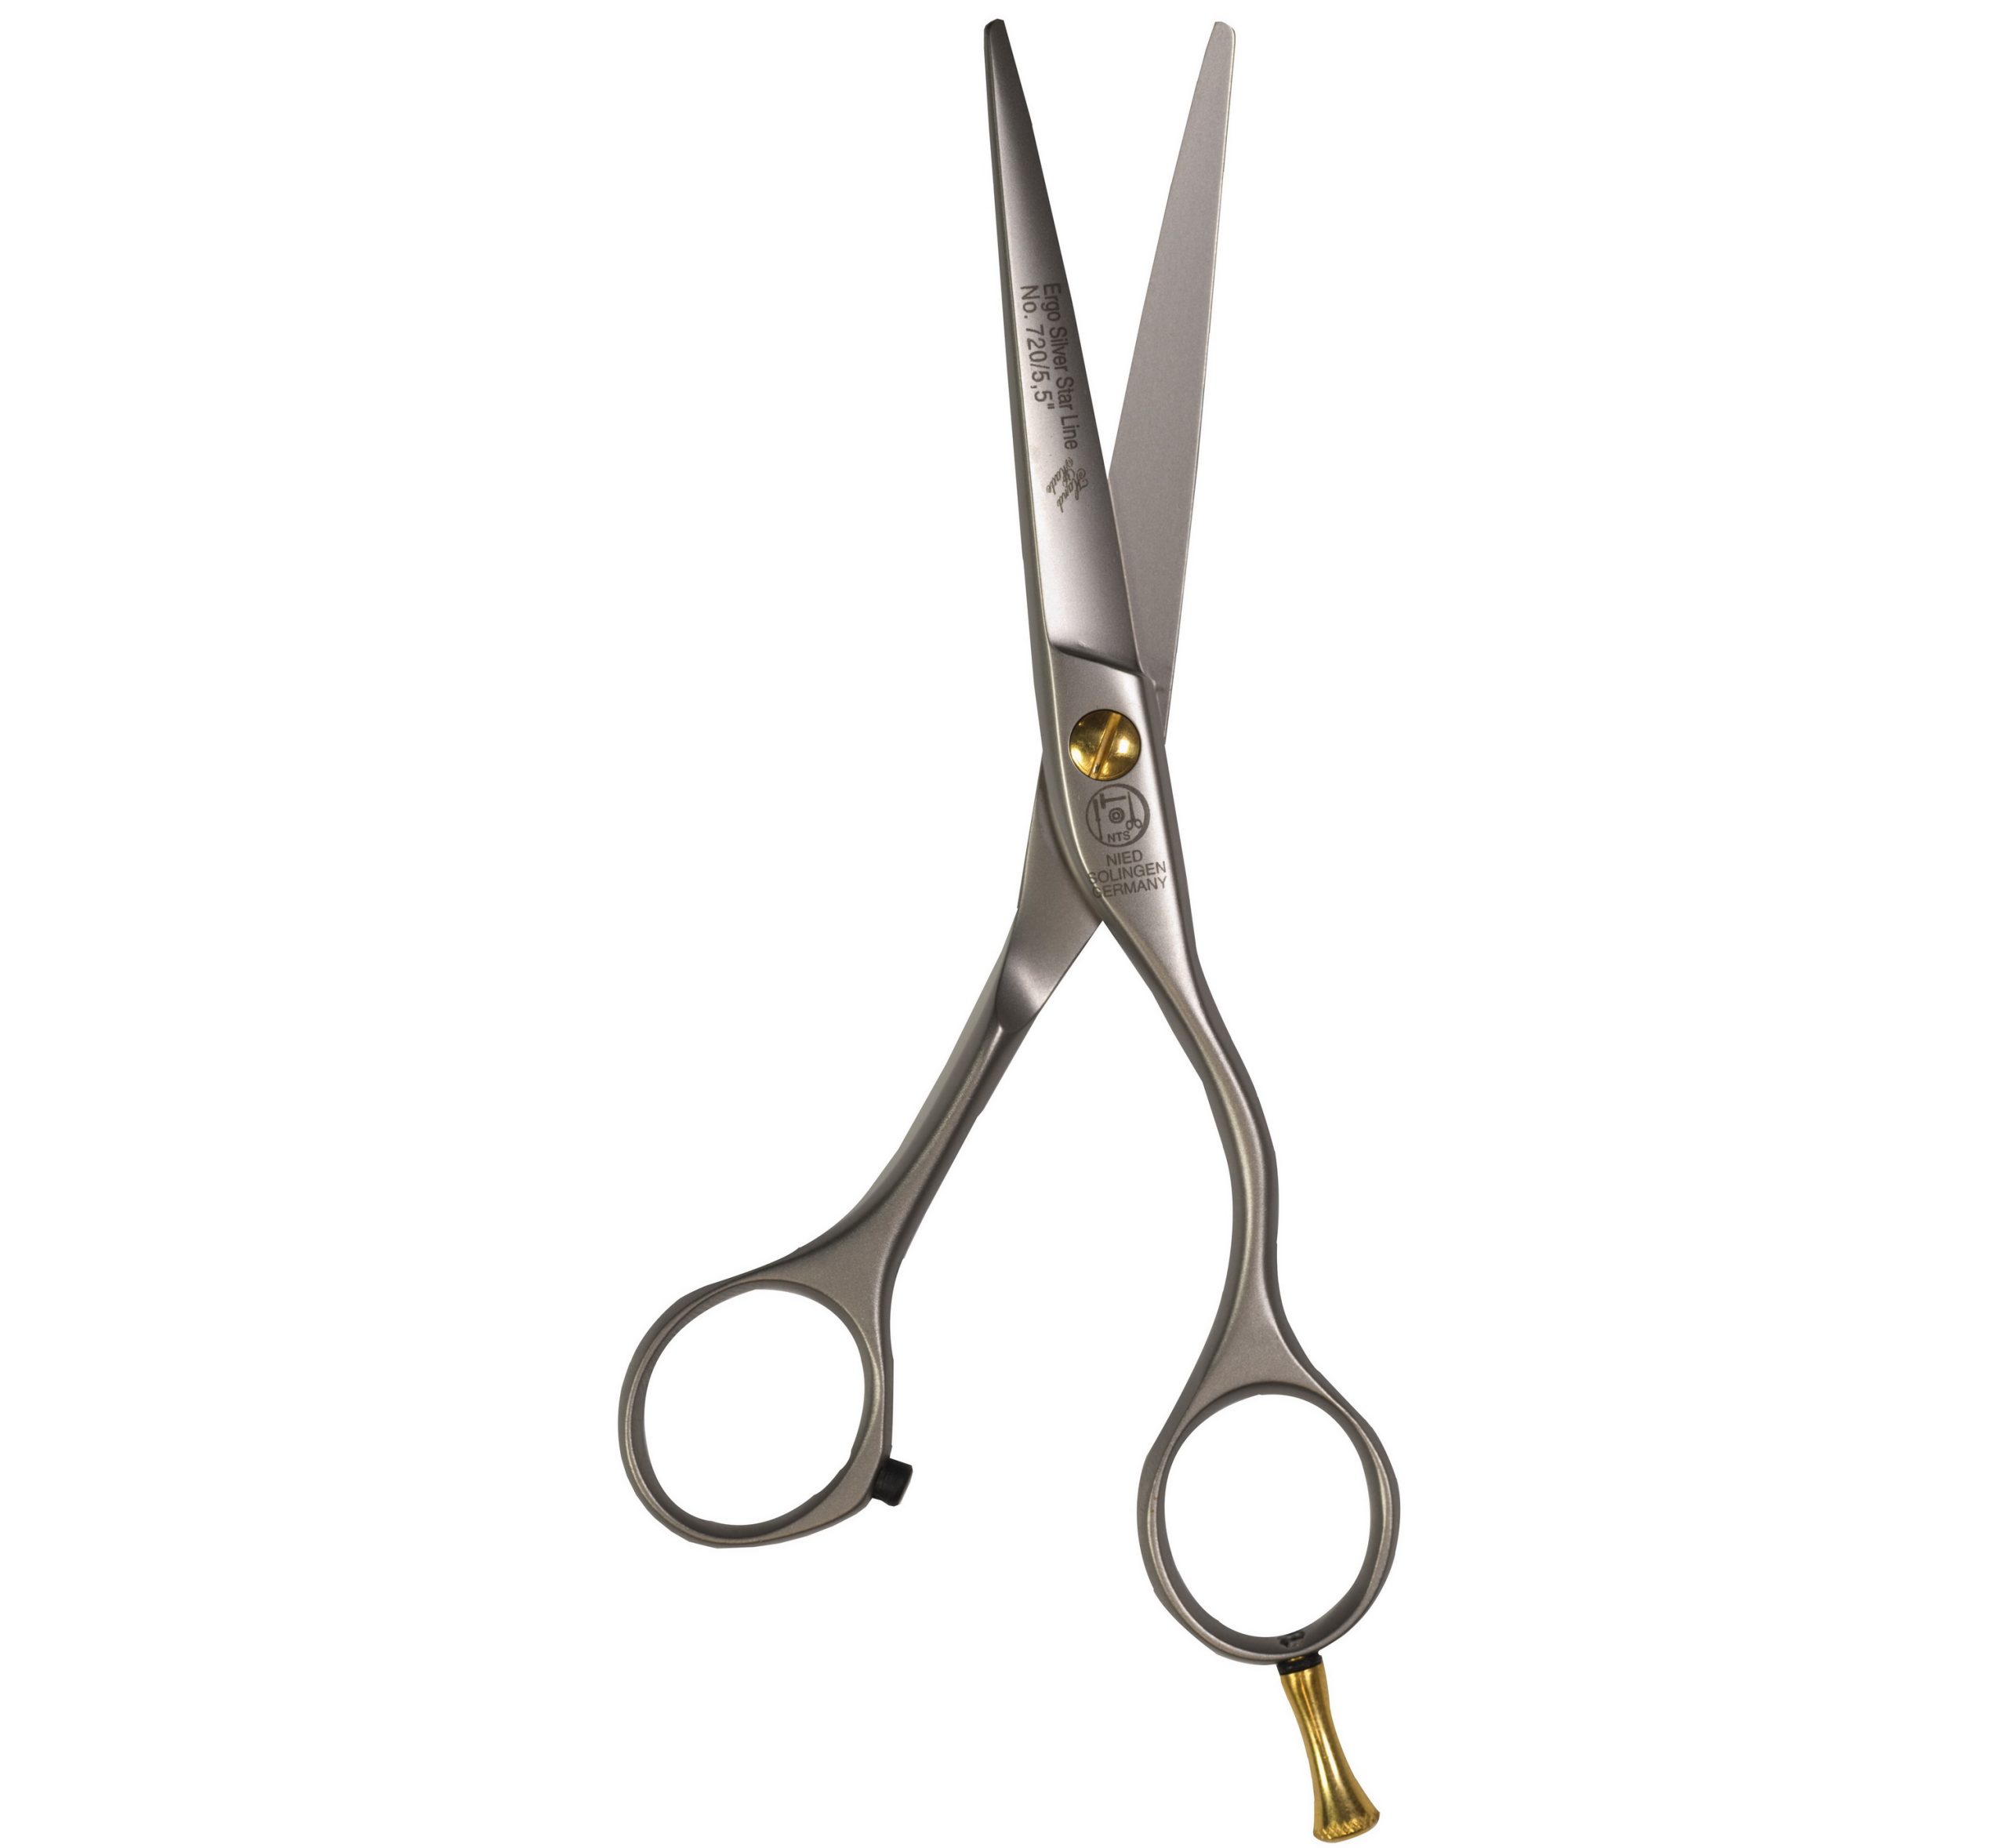 NTS Solingen 720 Ergo Silver Star German Shears Scissors | 5″ ″ and 6″  Lengths | One Microserrated Edge, One Razor Edge | INOX Rostfrei Stainless  Steel | Made in Germany – The Superior Shave